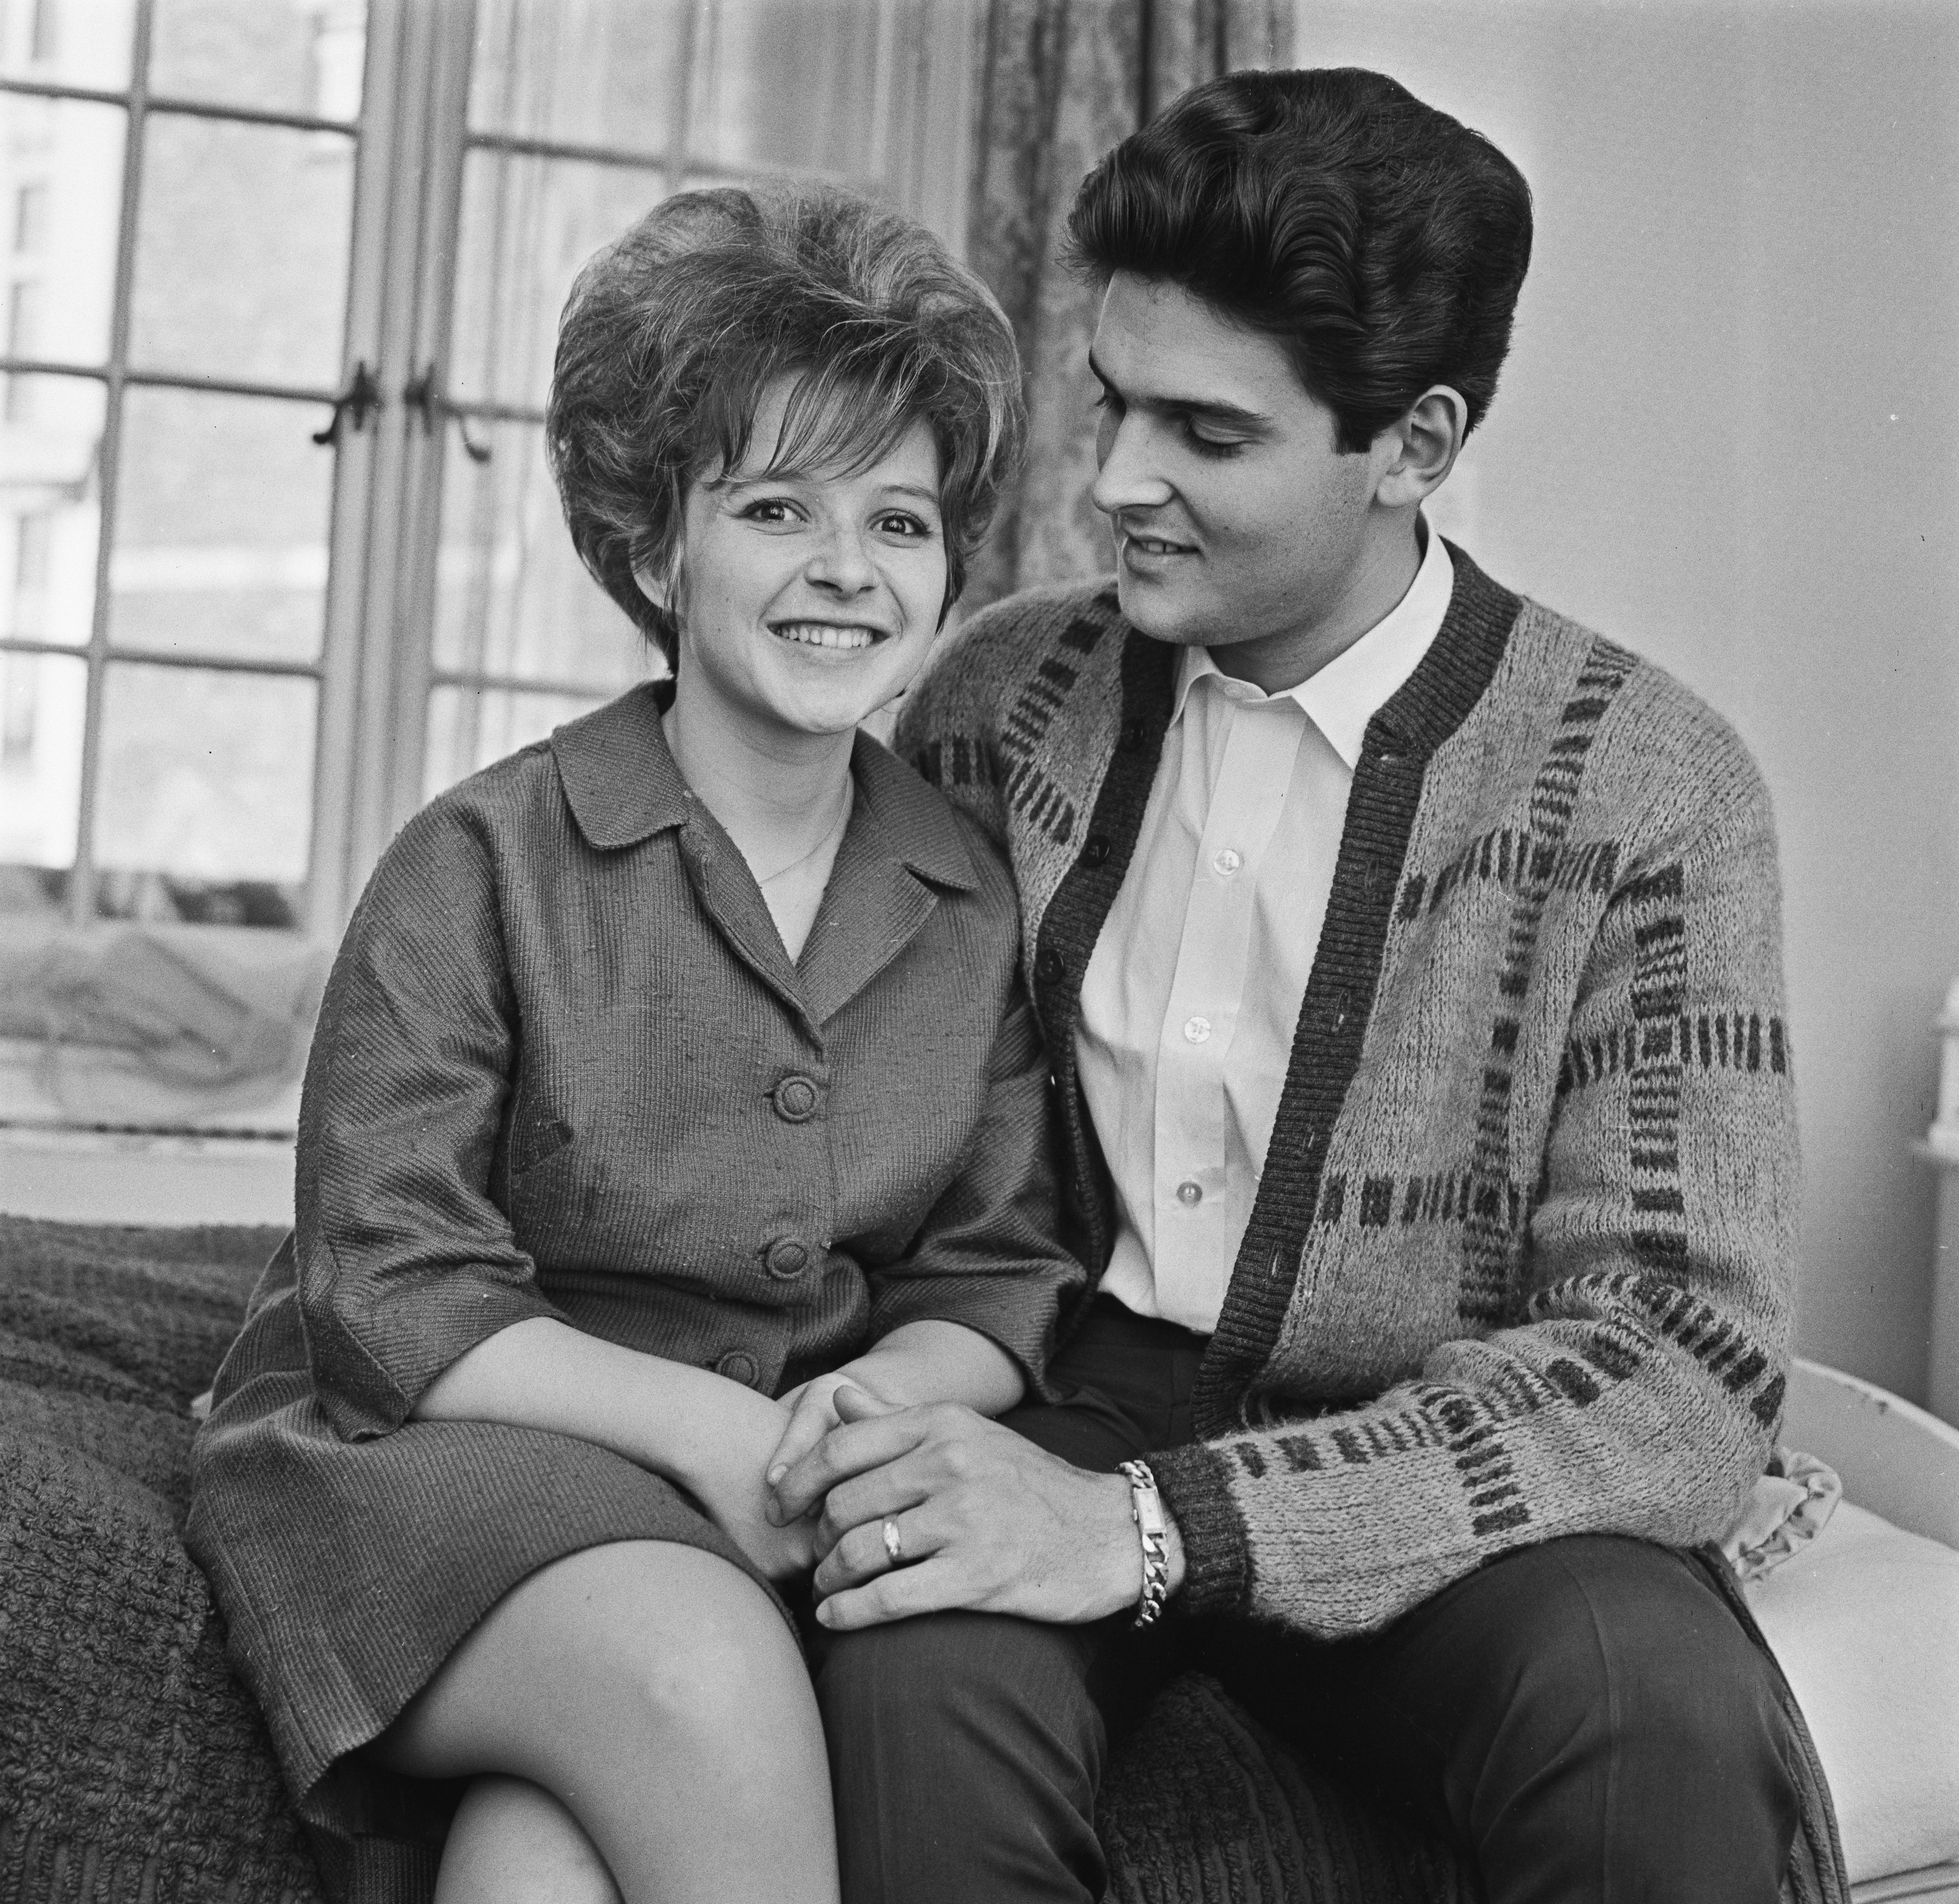 Brenda Lee with her husband Ronnie Shacklett photograohed in the United Kingdom in 1964 | Source: Getty Images